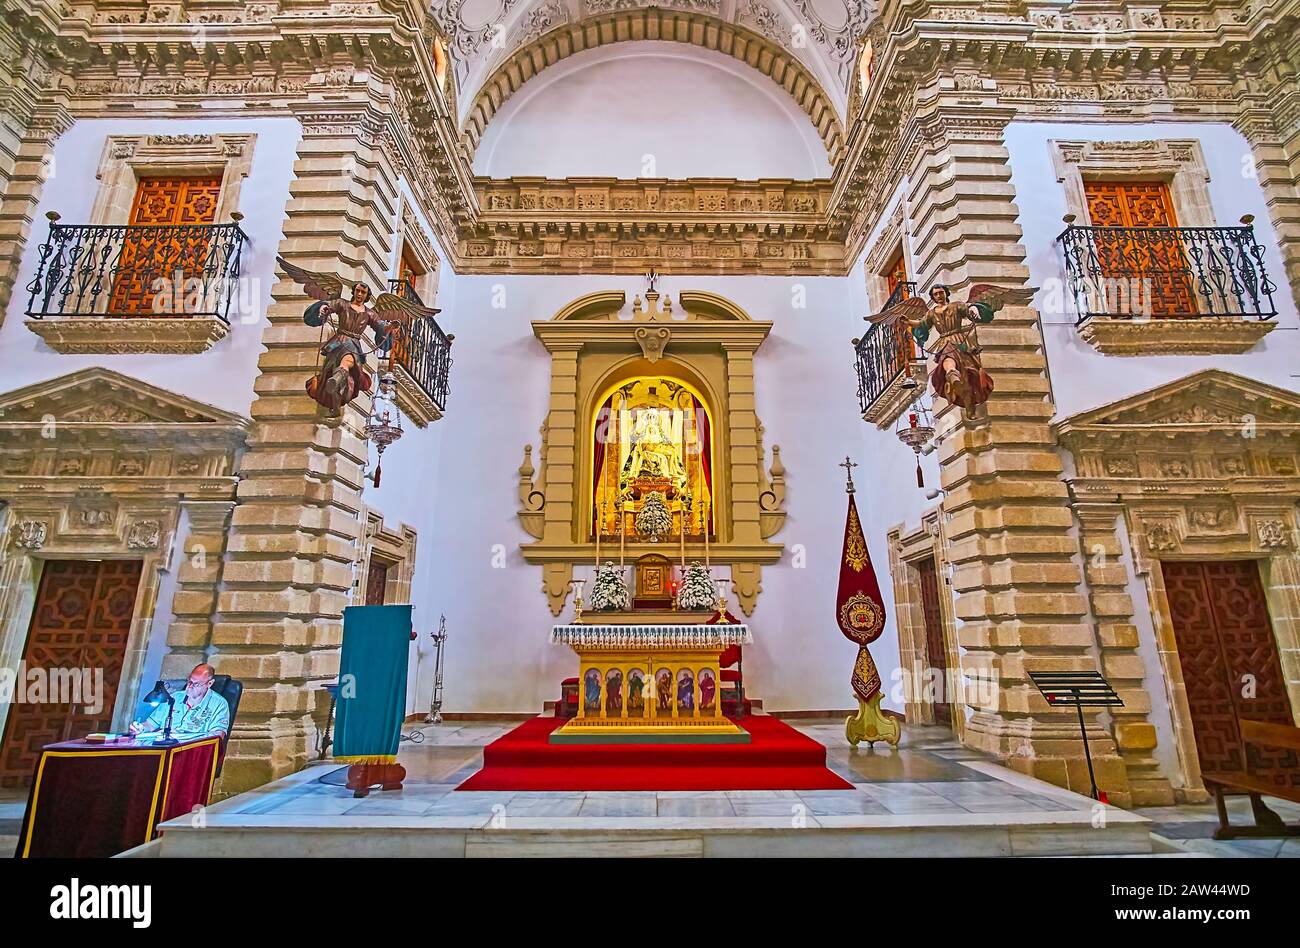 JEREZ, SPAIN - SEPTEMBER 20, 2019: The scenic altar of Our Lady of Anguish Chapel (Capilla de Nuestra Senora de las Angustias) with Our Lady sculpture Stock Photo